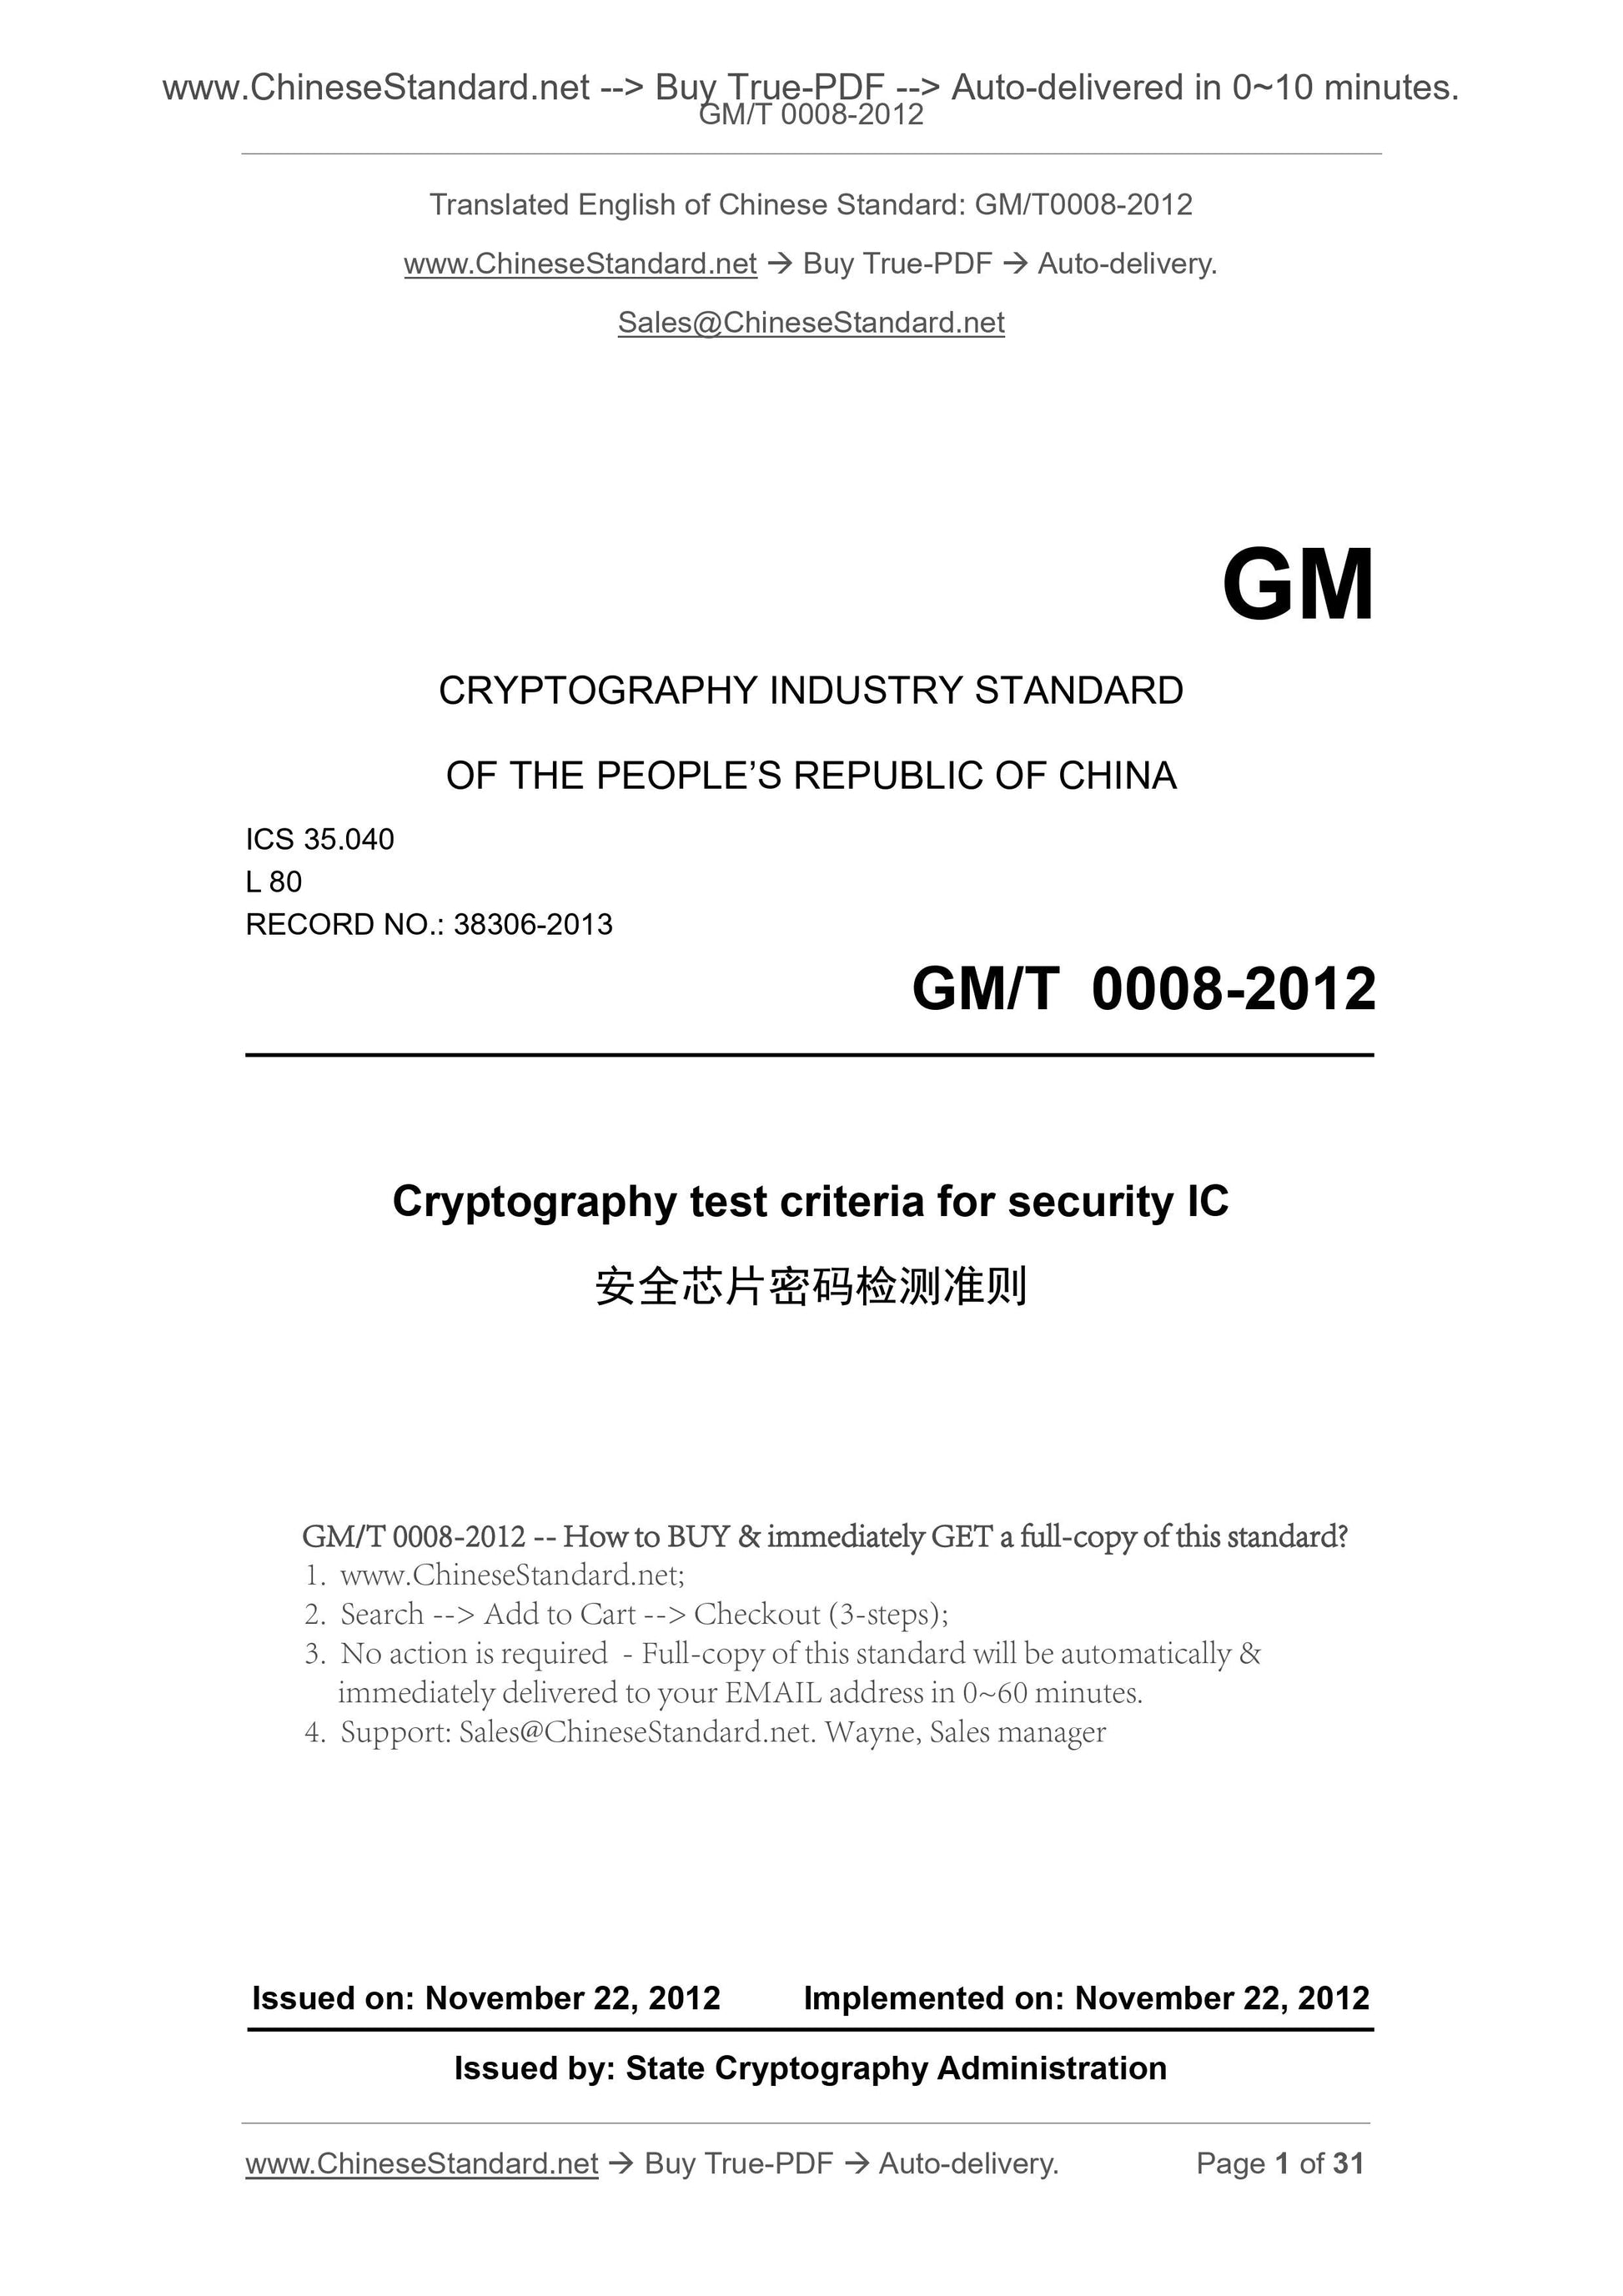 GM/T 0008-2012 Page 1